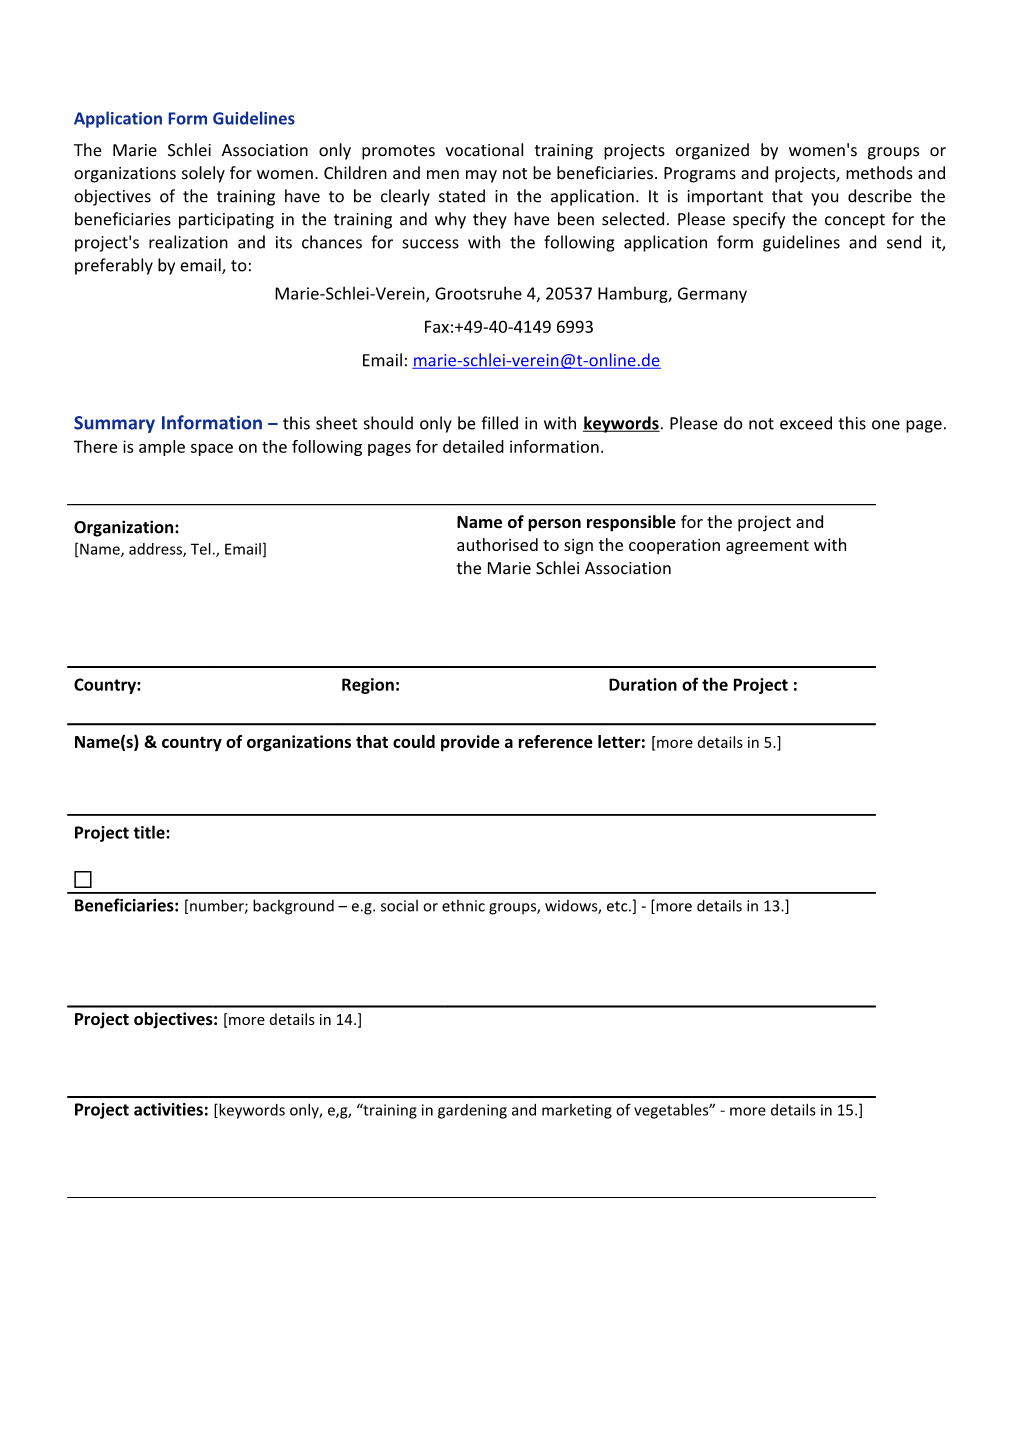 Application Form Guidelines